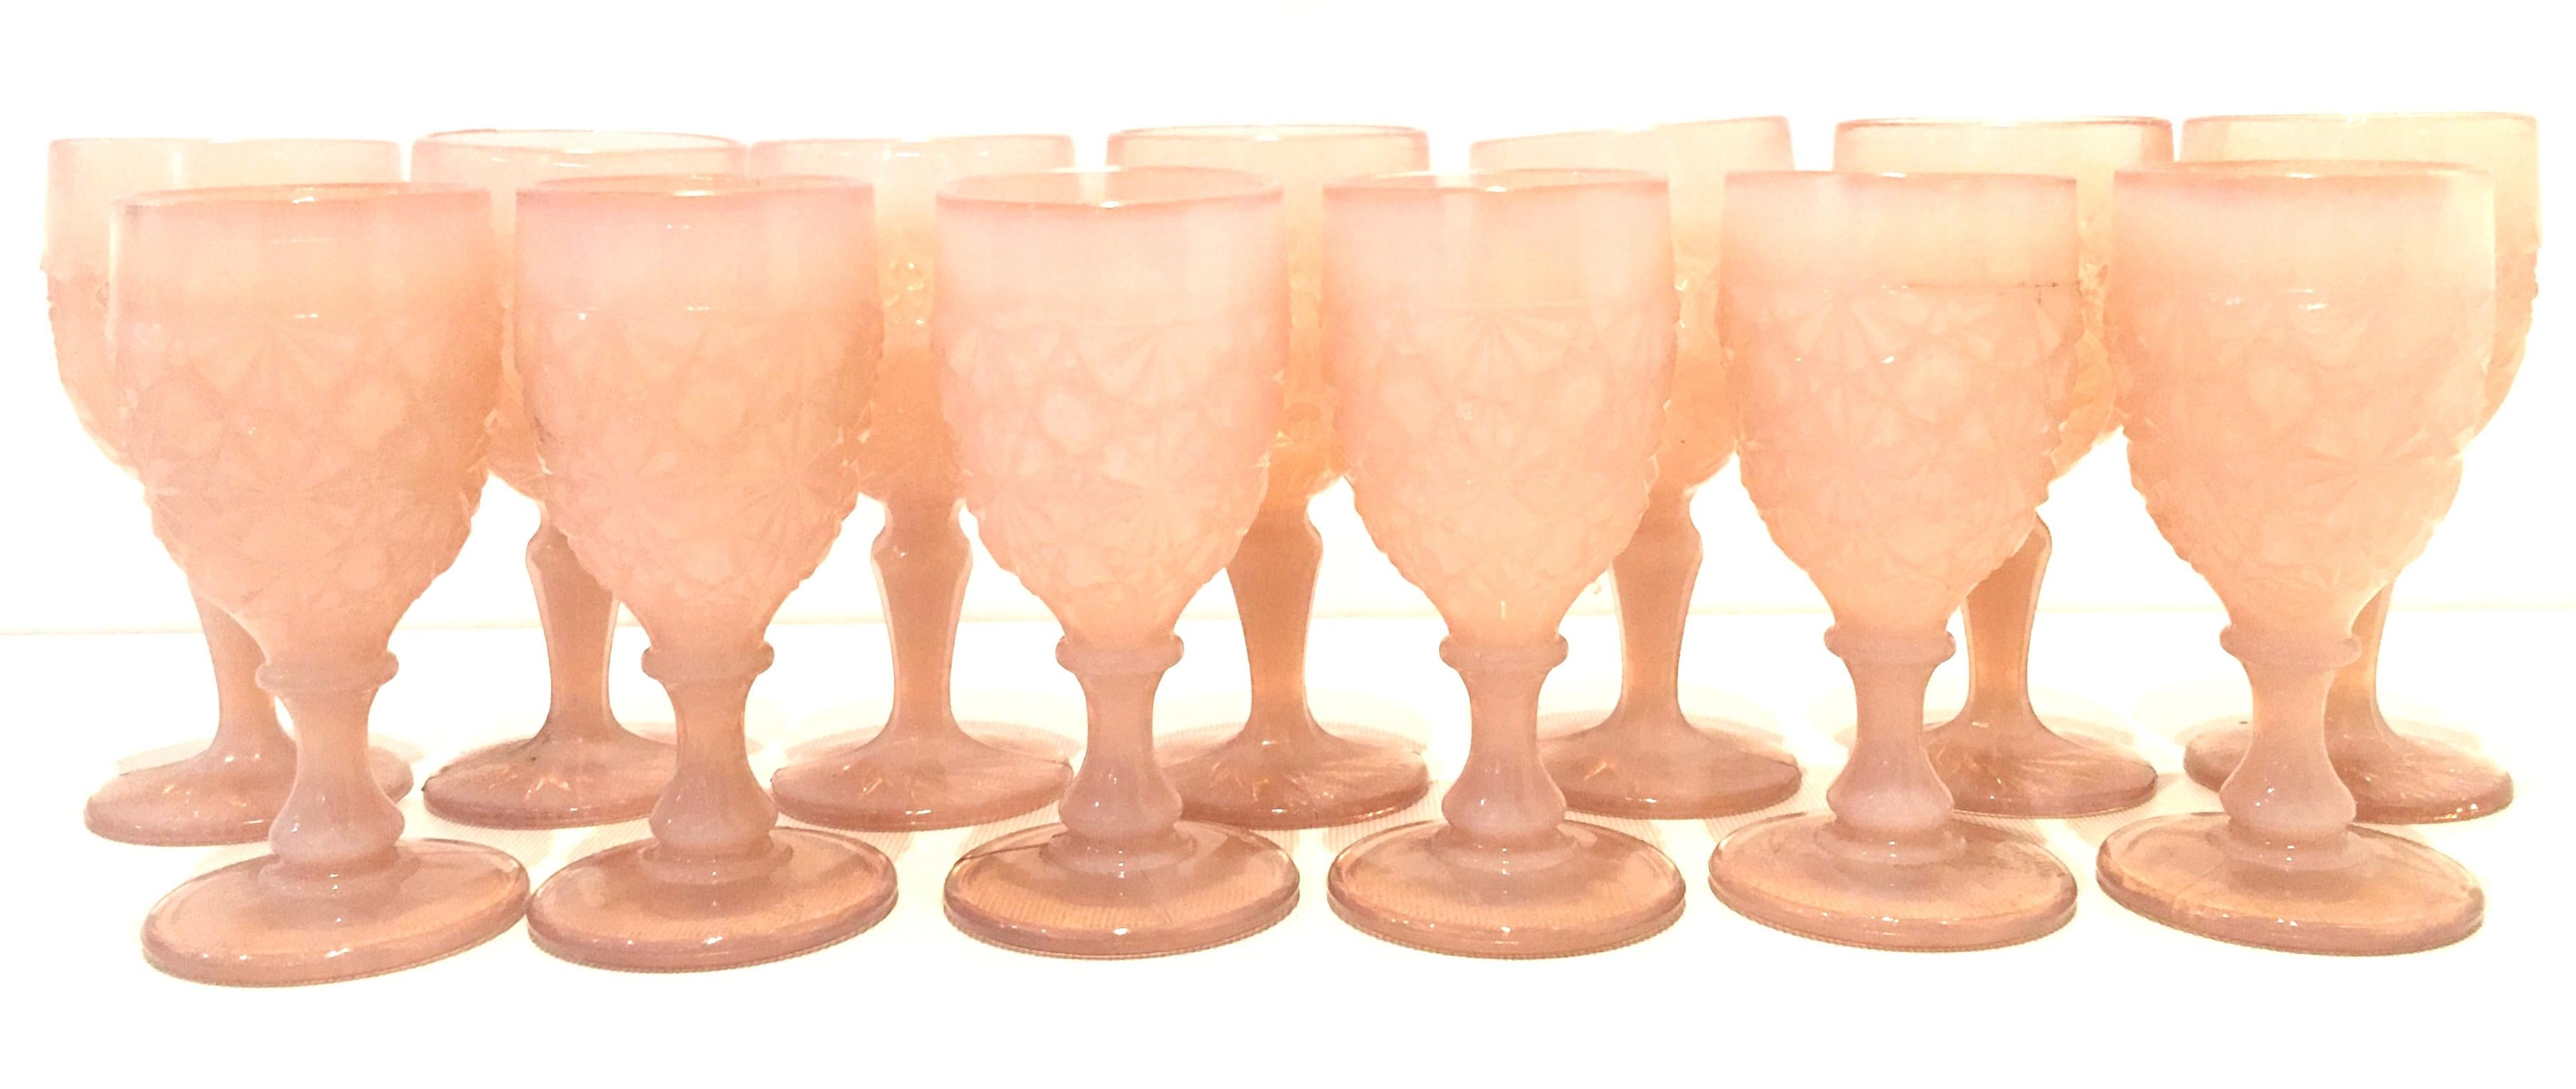 Mid-20th century American cut and faceted pink glass stem drink glasses, set of 13 pieces.
Set includes. Seven tall and six smaller stem glasses. The raised diamond and abstract floral pattern is similar, but not identical between the two